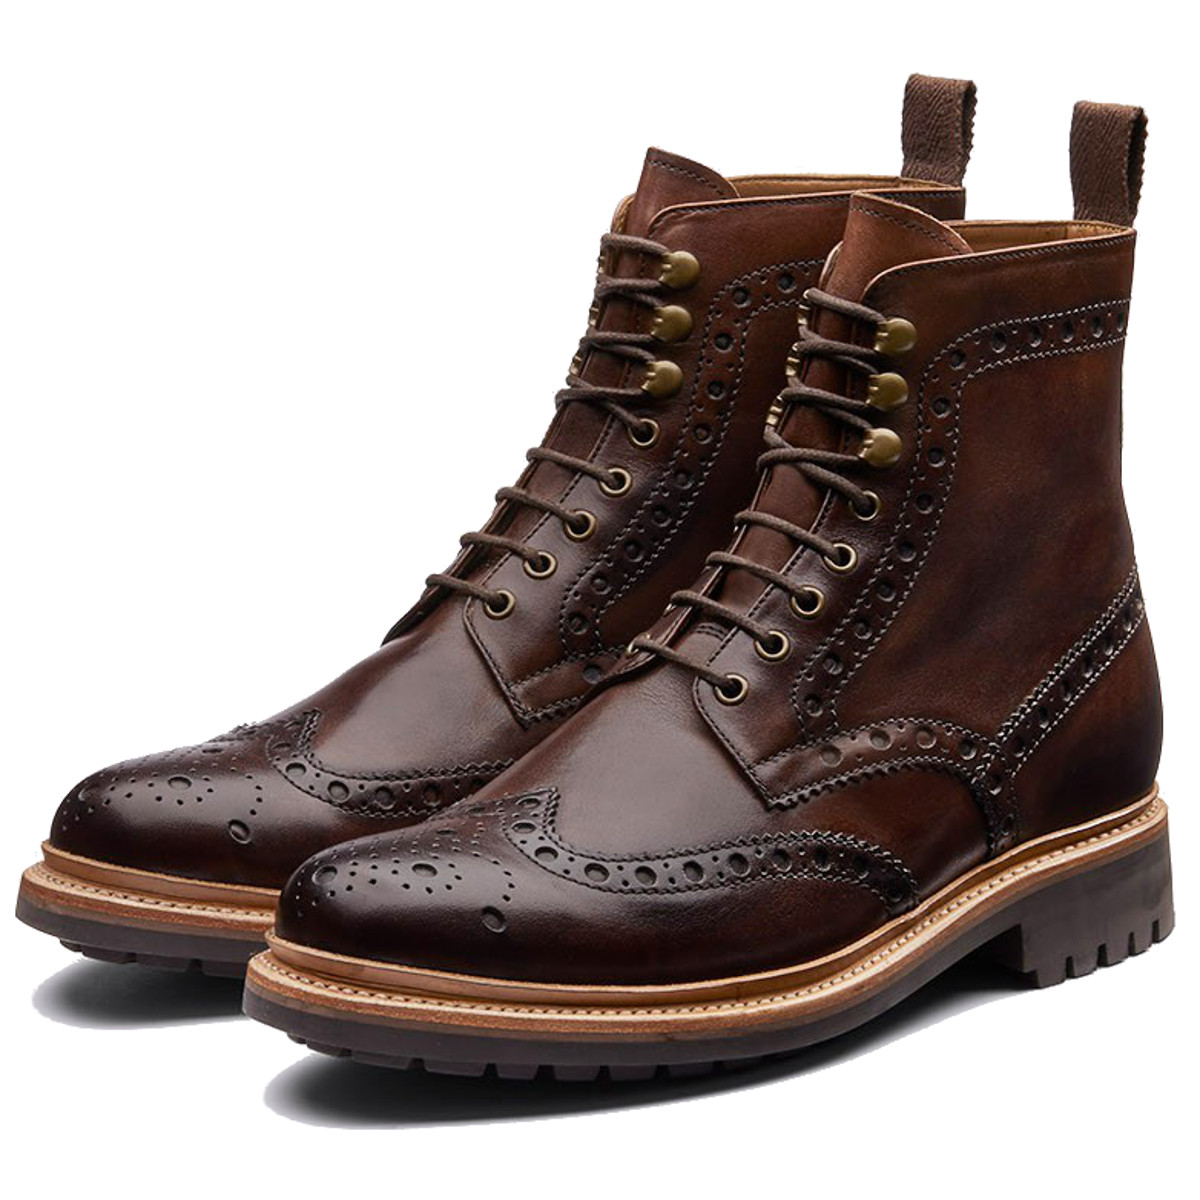 grenson brown boots